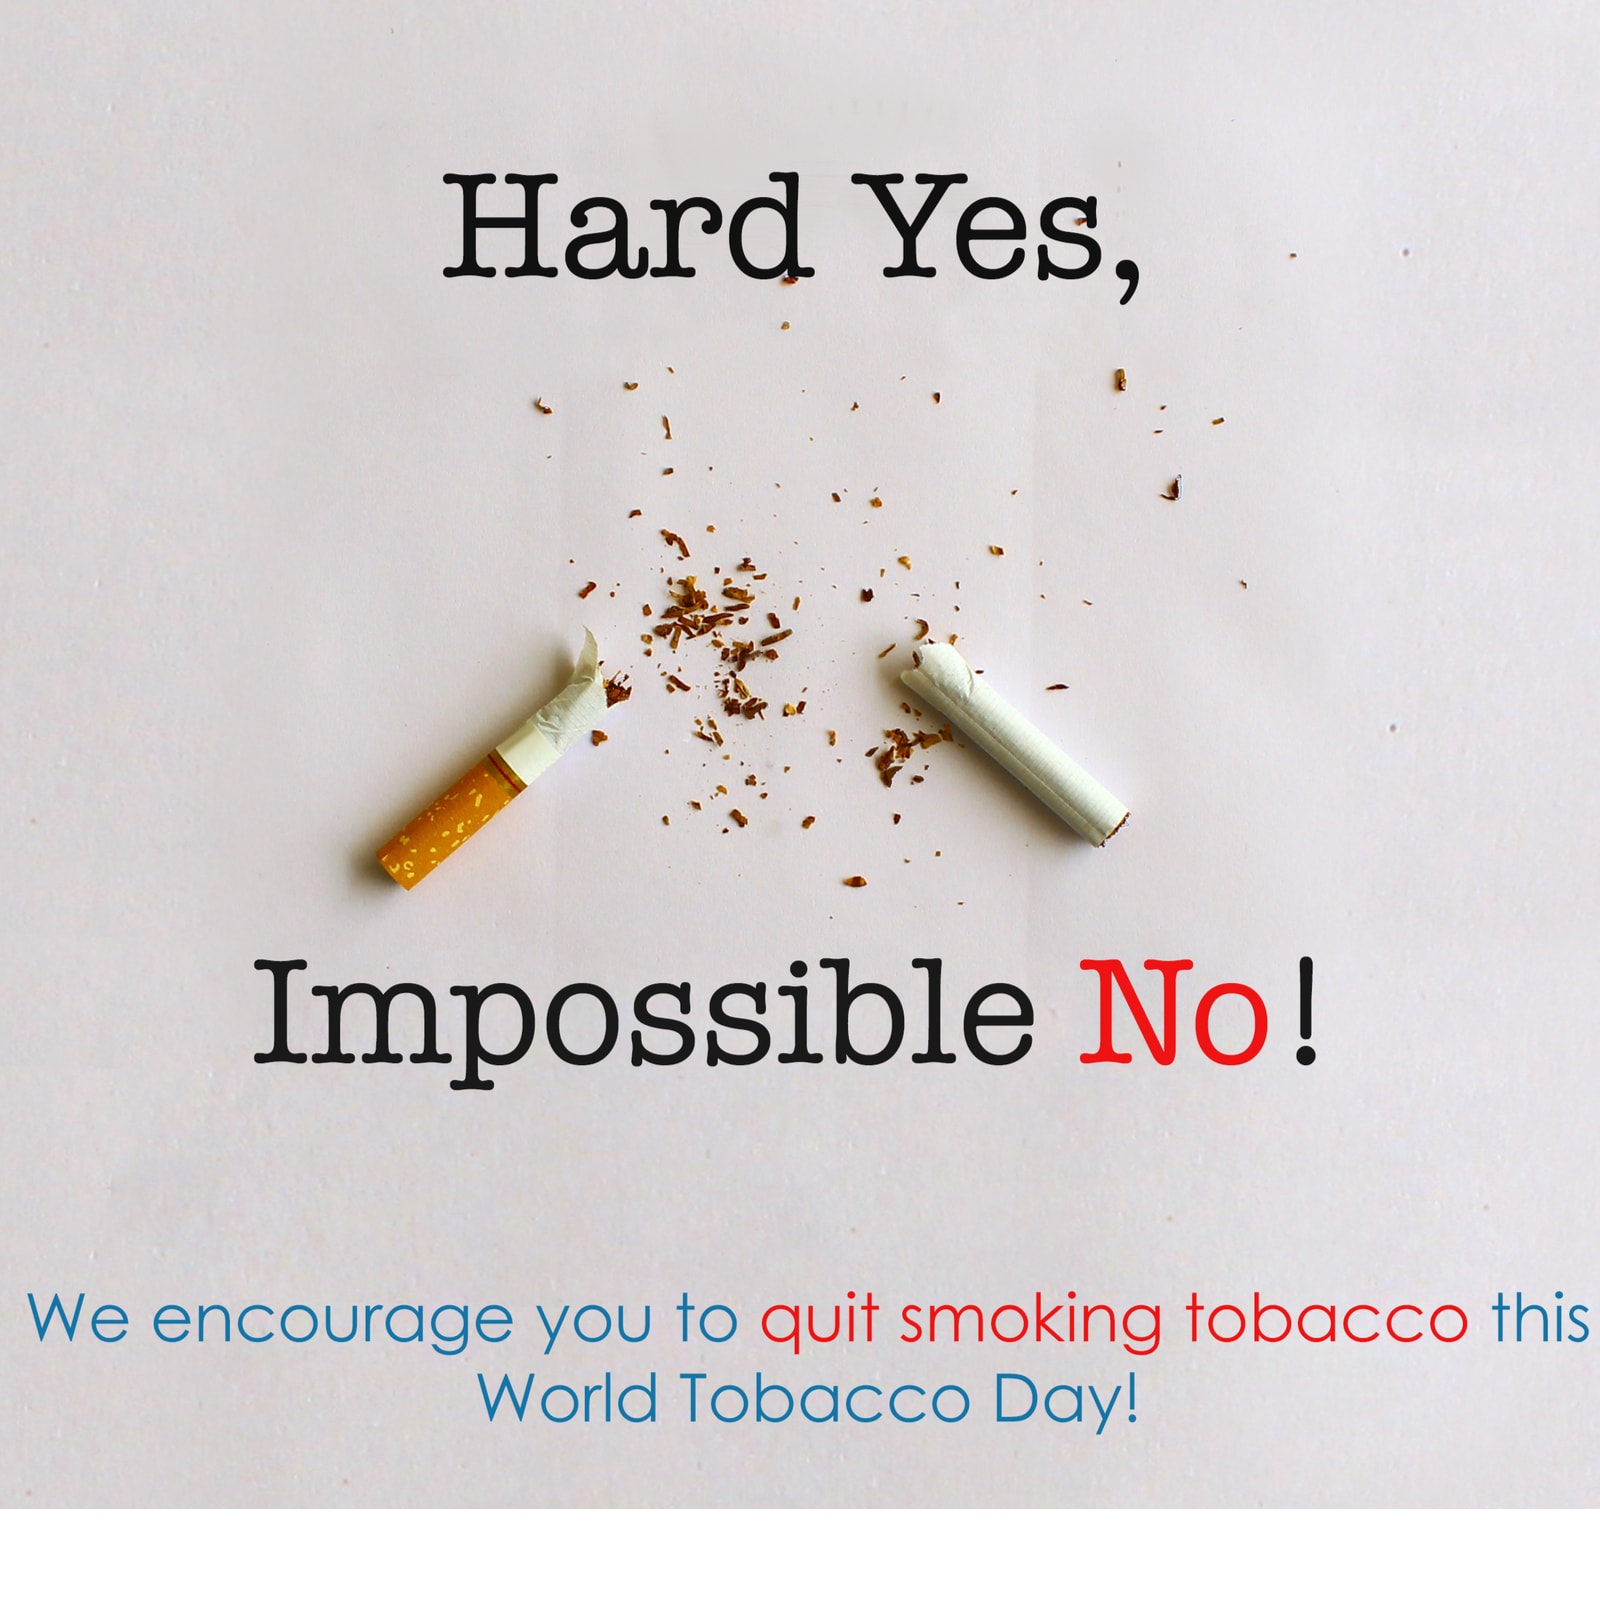 World No-Tobacco Day aims to spread awareness about the consequences of using tobacco. (Representative image: Shutterstock)